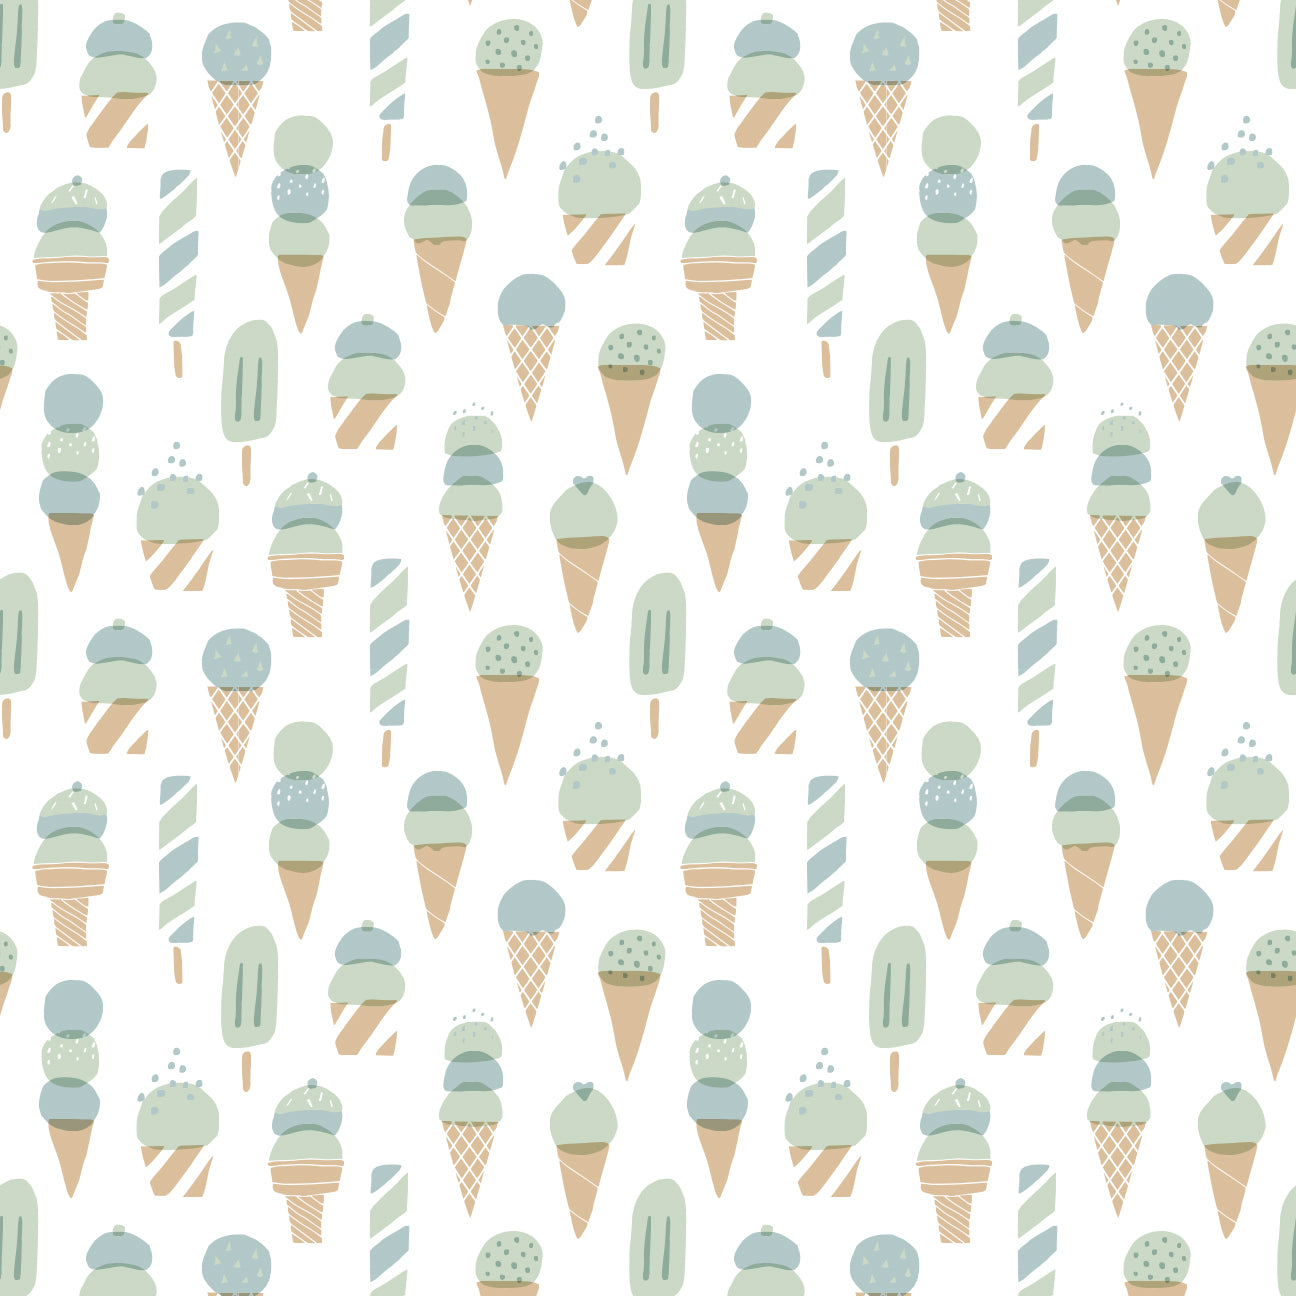 Footed Romper - Ice Cream Mint & Blue